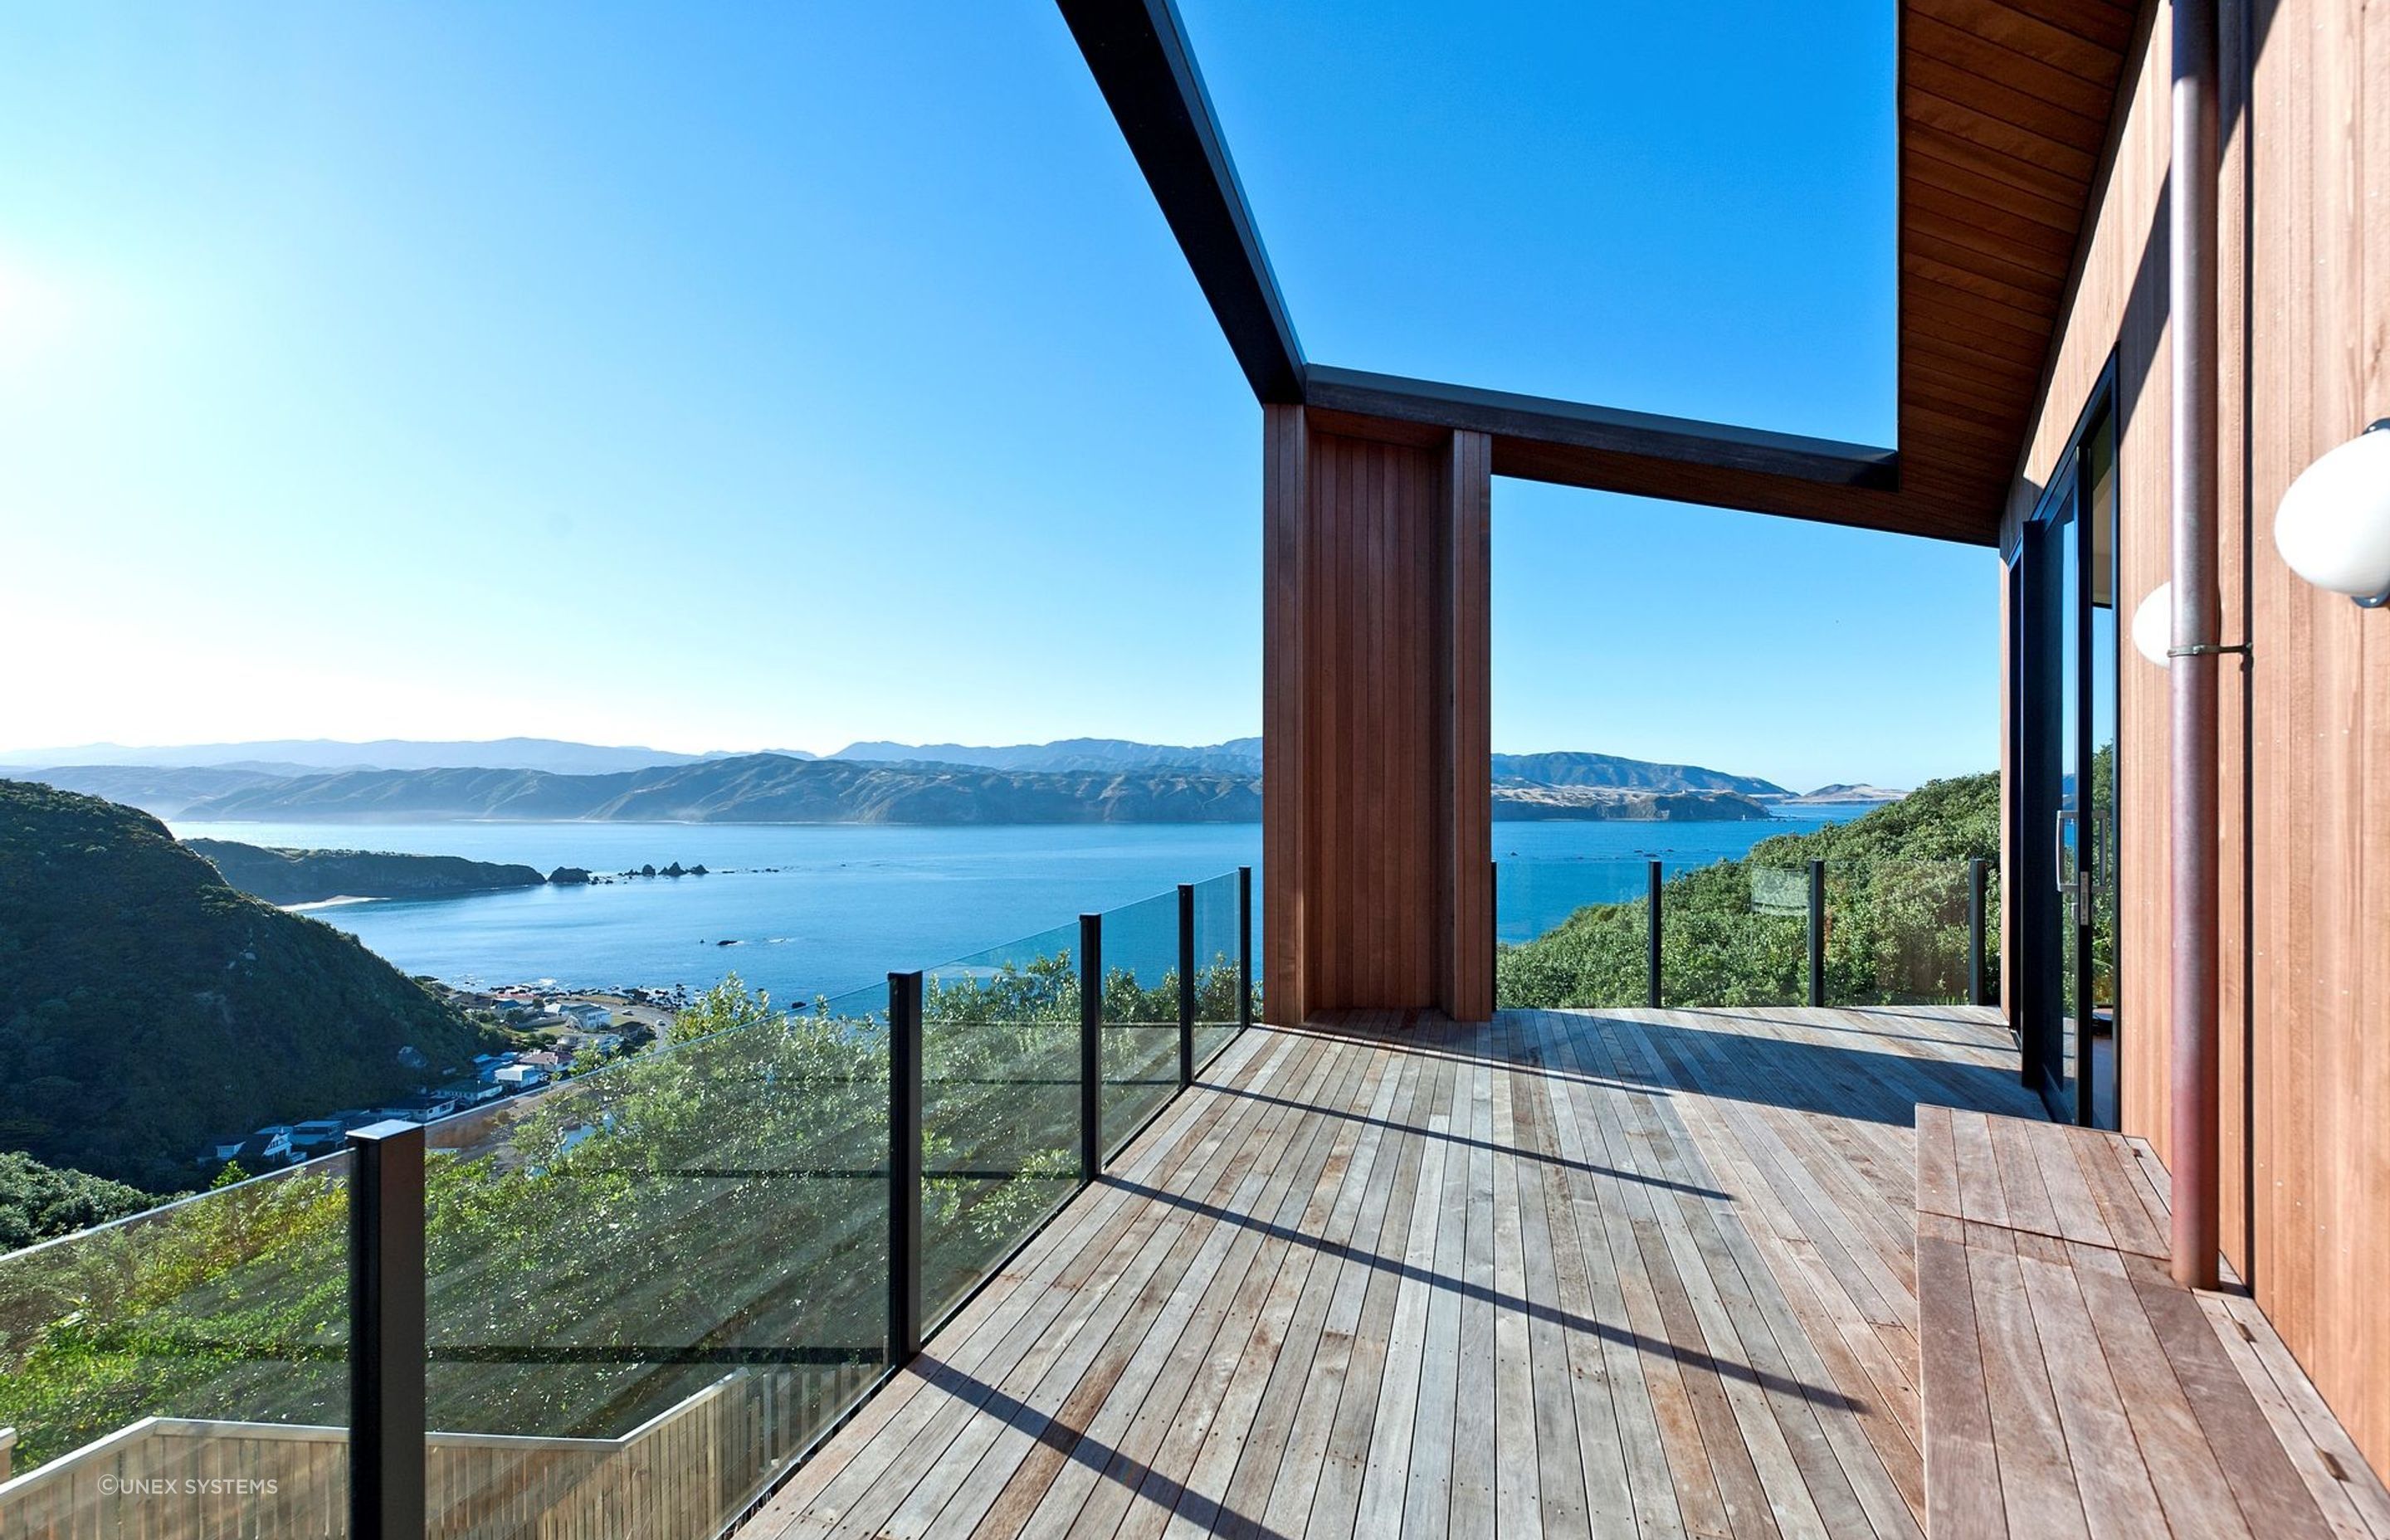 This Vetro Semi-Frameless Glass Balustrade shows how you can preserve a spectacular view.